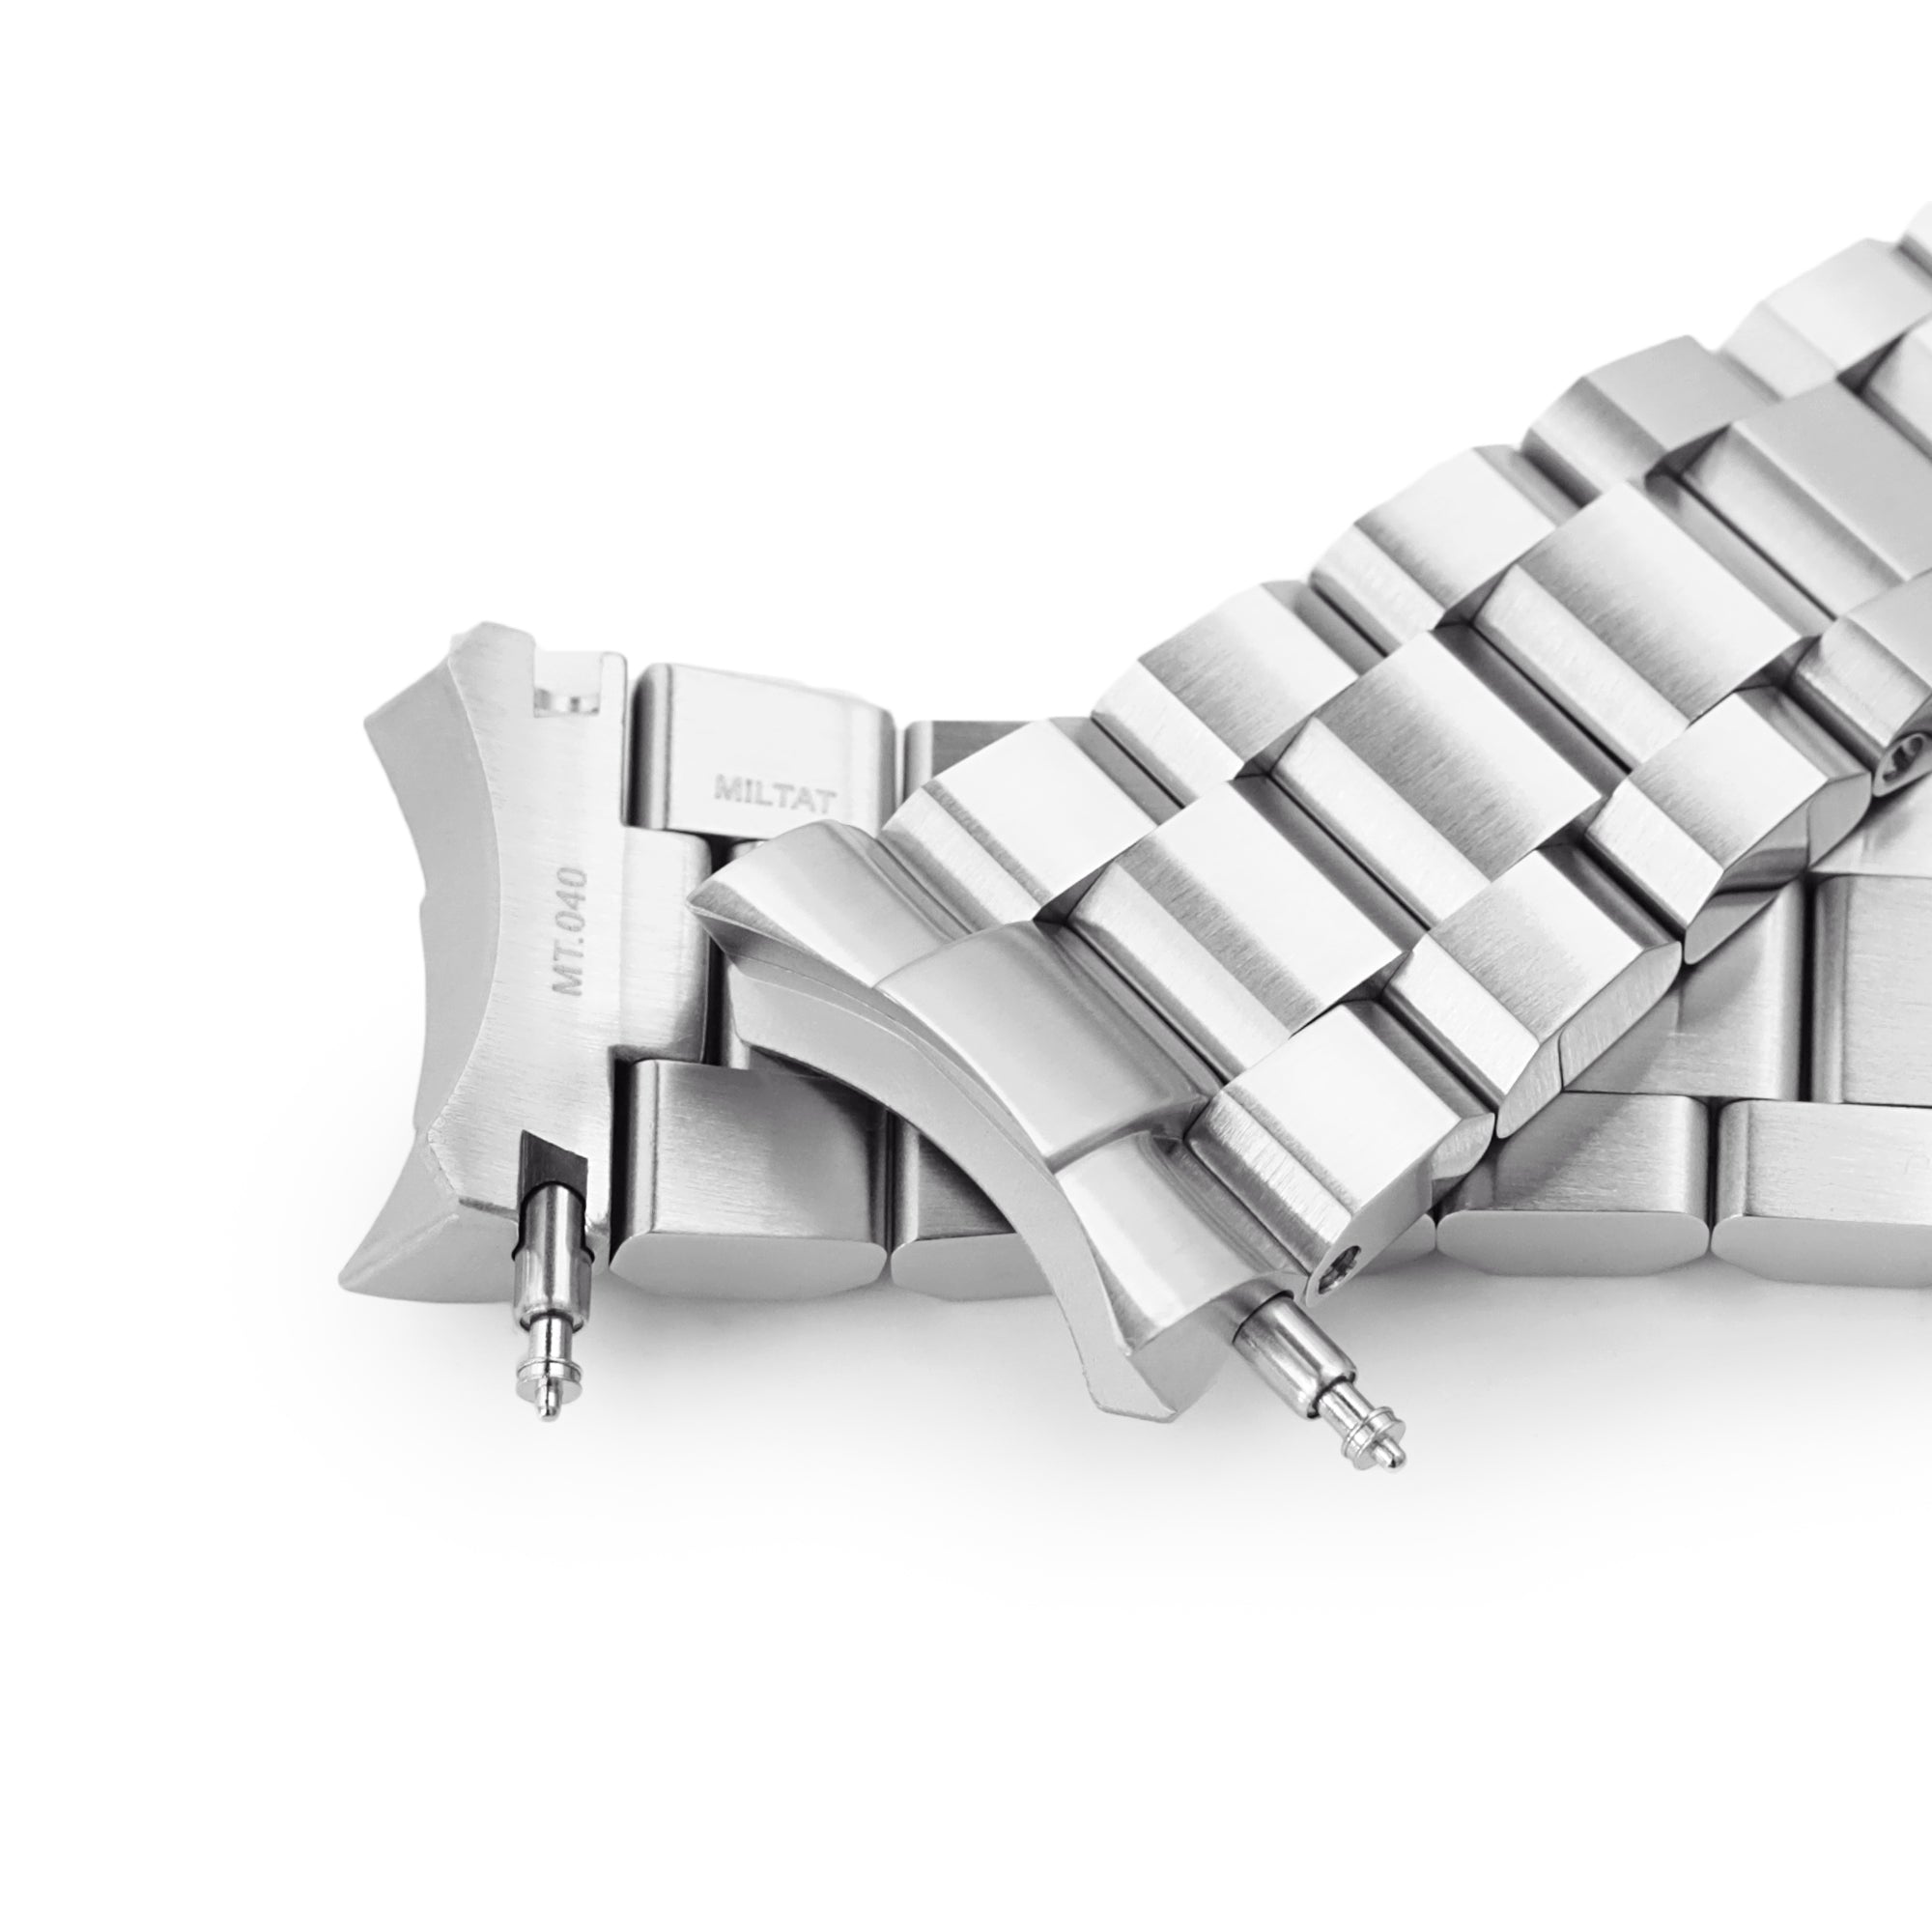  SKM 316L Stainless Steel WatchBand for Patek Philippe